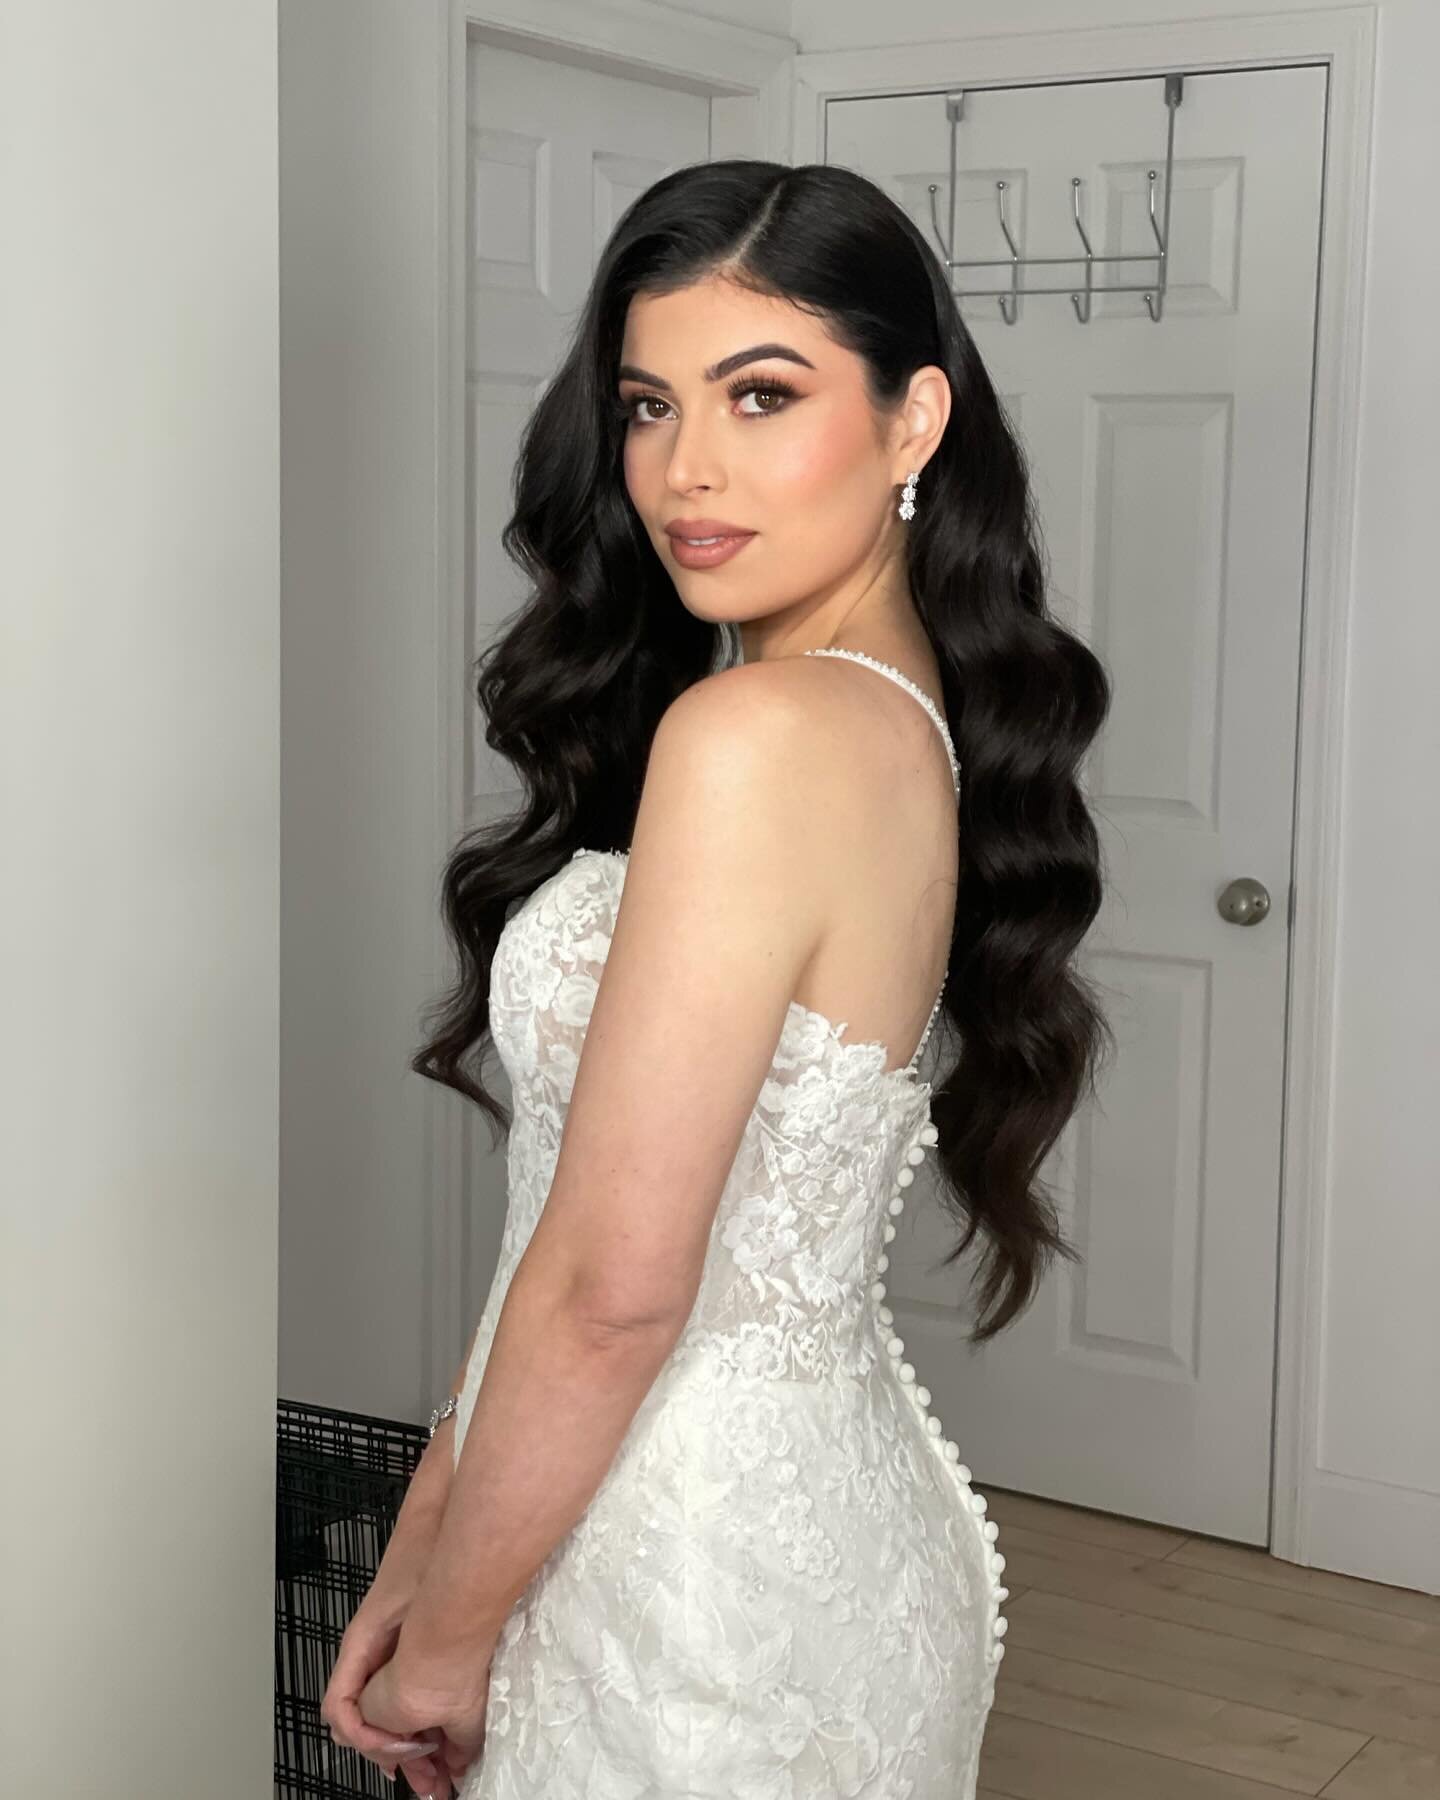 Started 2024 bridal off with a 💥!! 

📌 SAVE this post for inspo for your bridal trial this season! 👰🏻&zwj;♀️💄✨

GLAM SQUAD 
Makeup: @courtneyleighartistry 
Hair: @bridalhairvancouver 

Secure your date now by emailing courtneyleighartistry@gmail